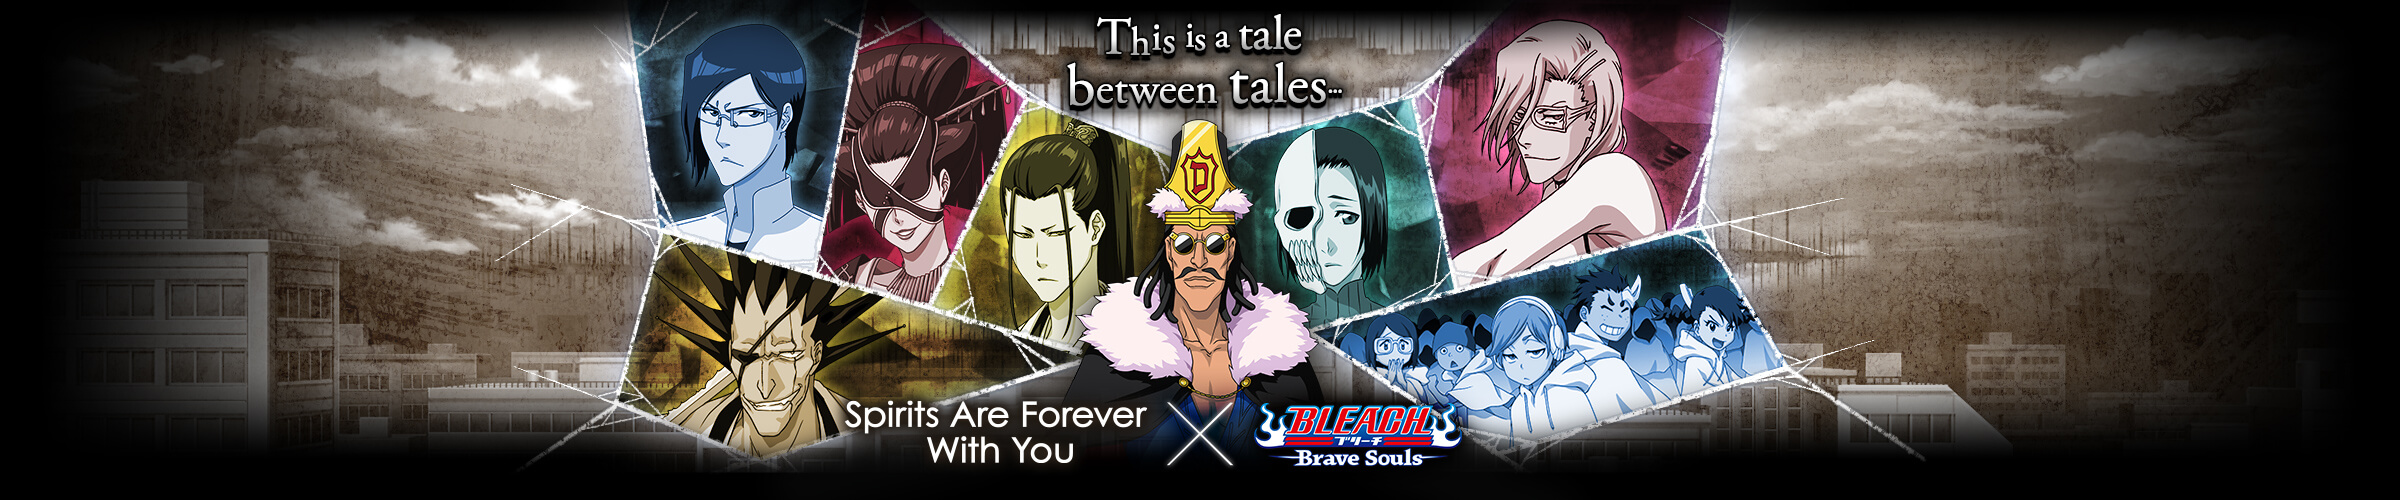 This is a tale between tales... Spirits Are Forever With You × BLEACH Brave Souls